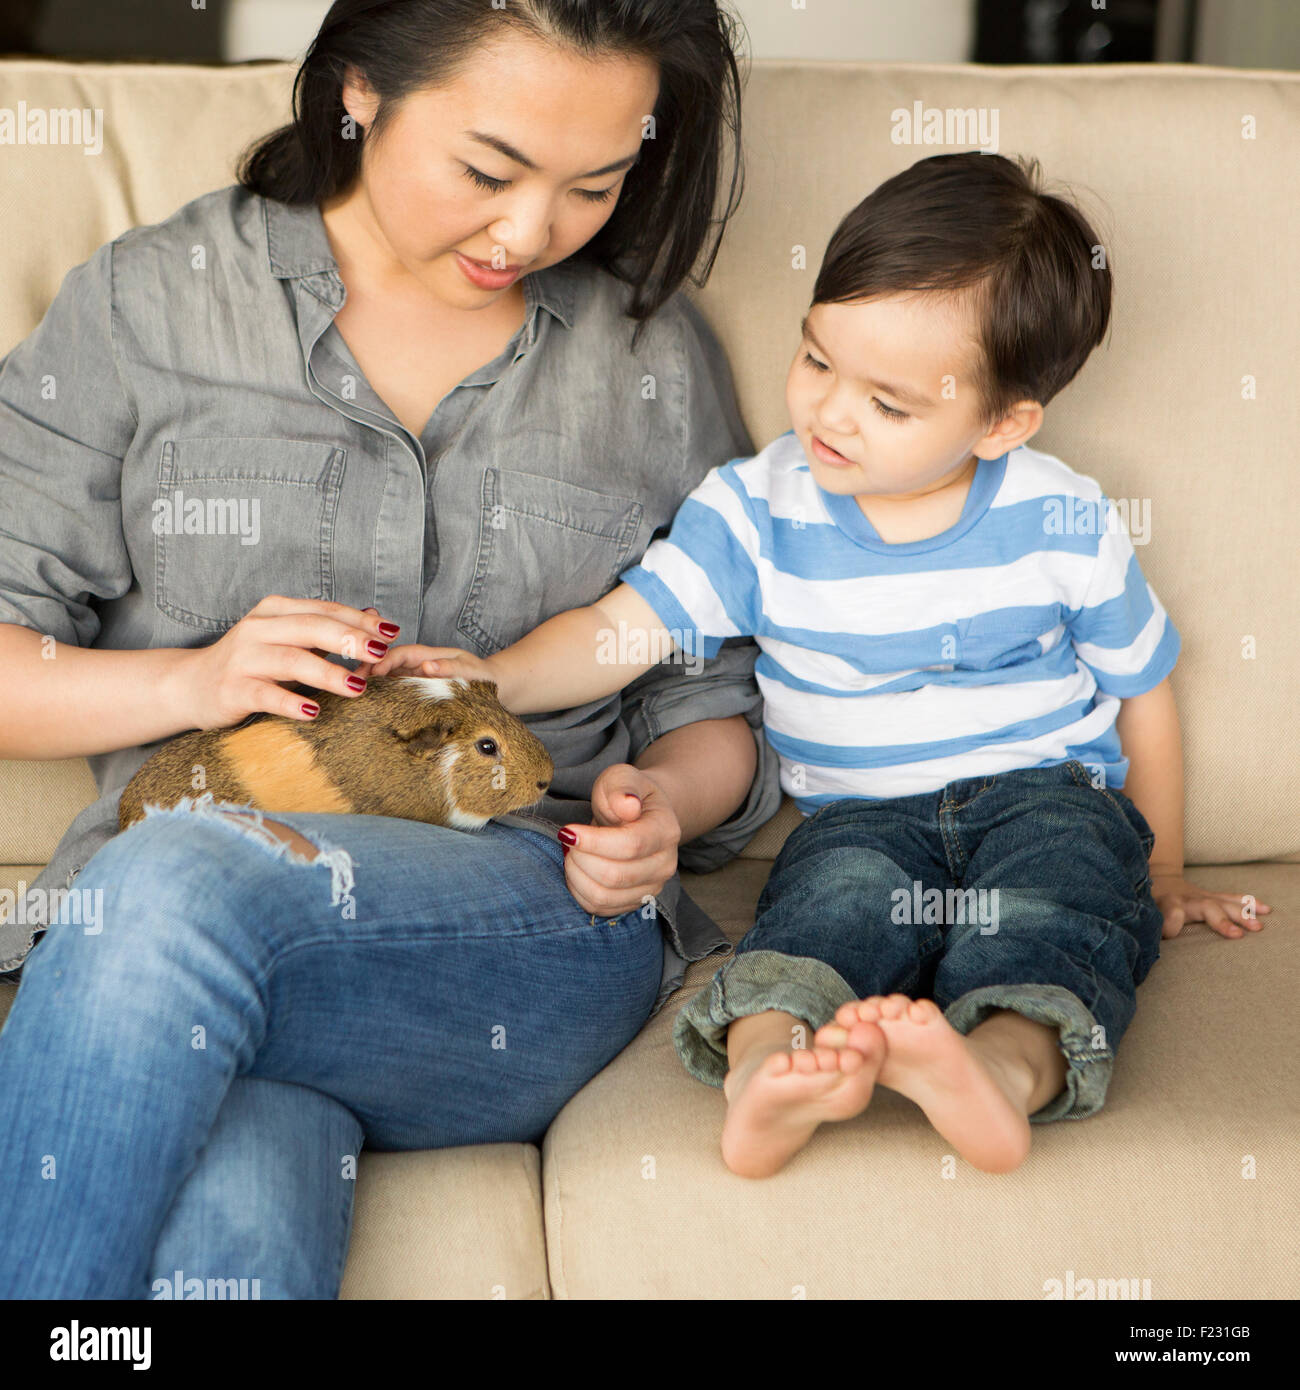 Smiling woman sitting on a sofa, a guinea pig sitting on her lap, her young son stroking the animal. Stock Photo